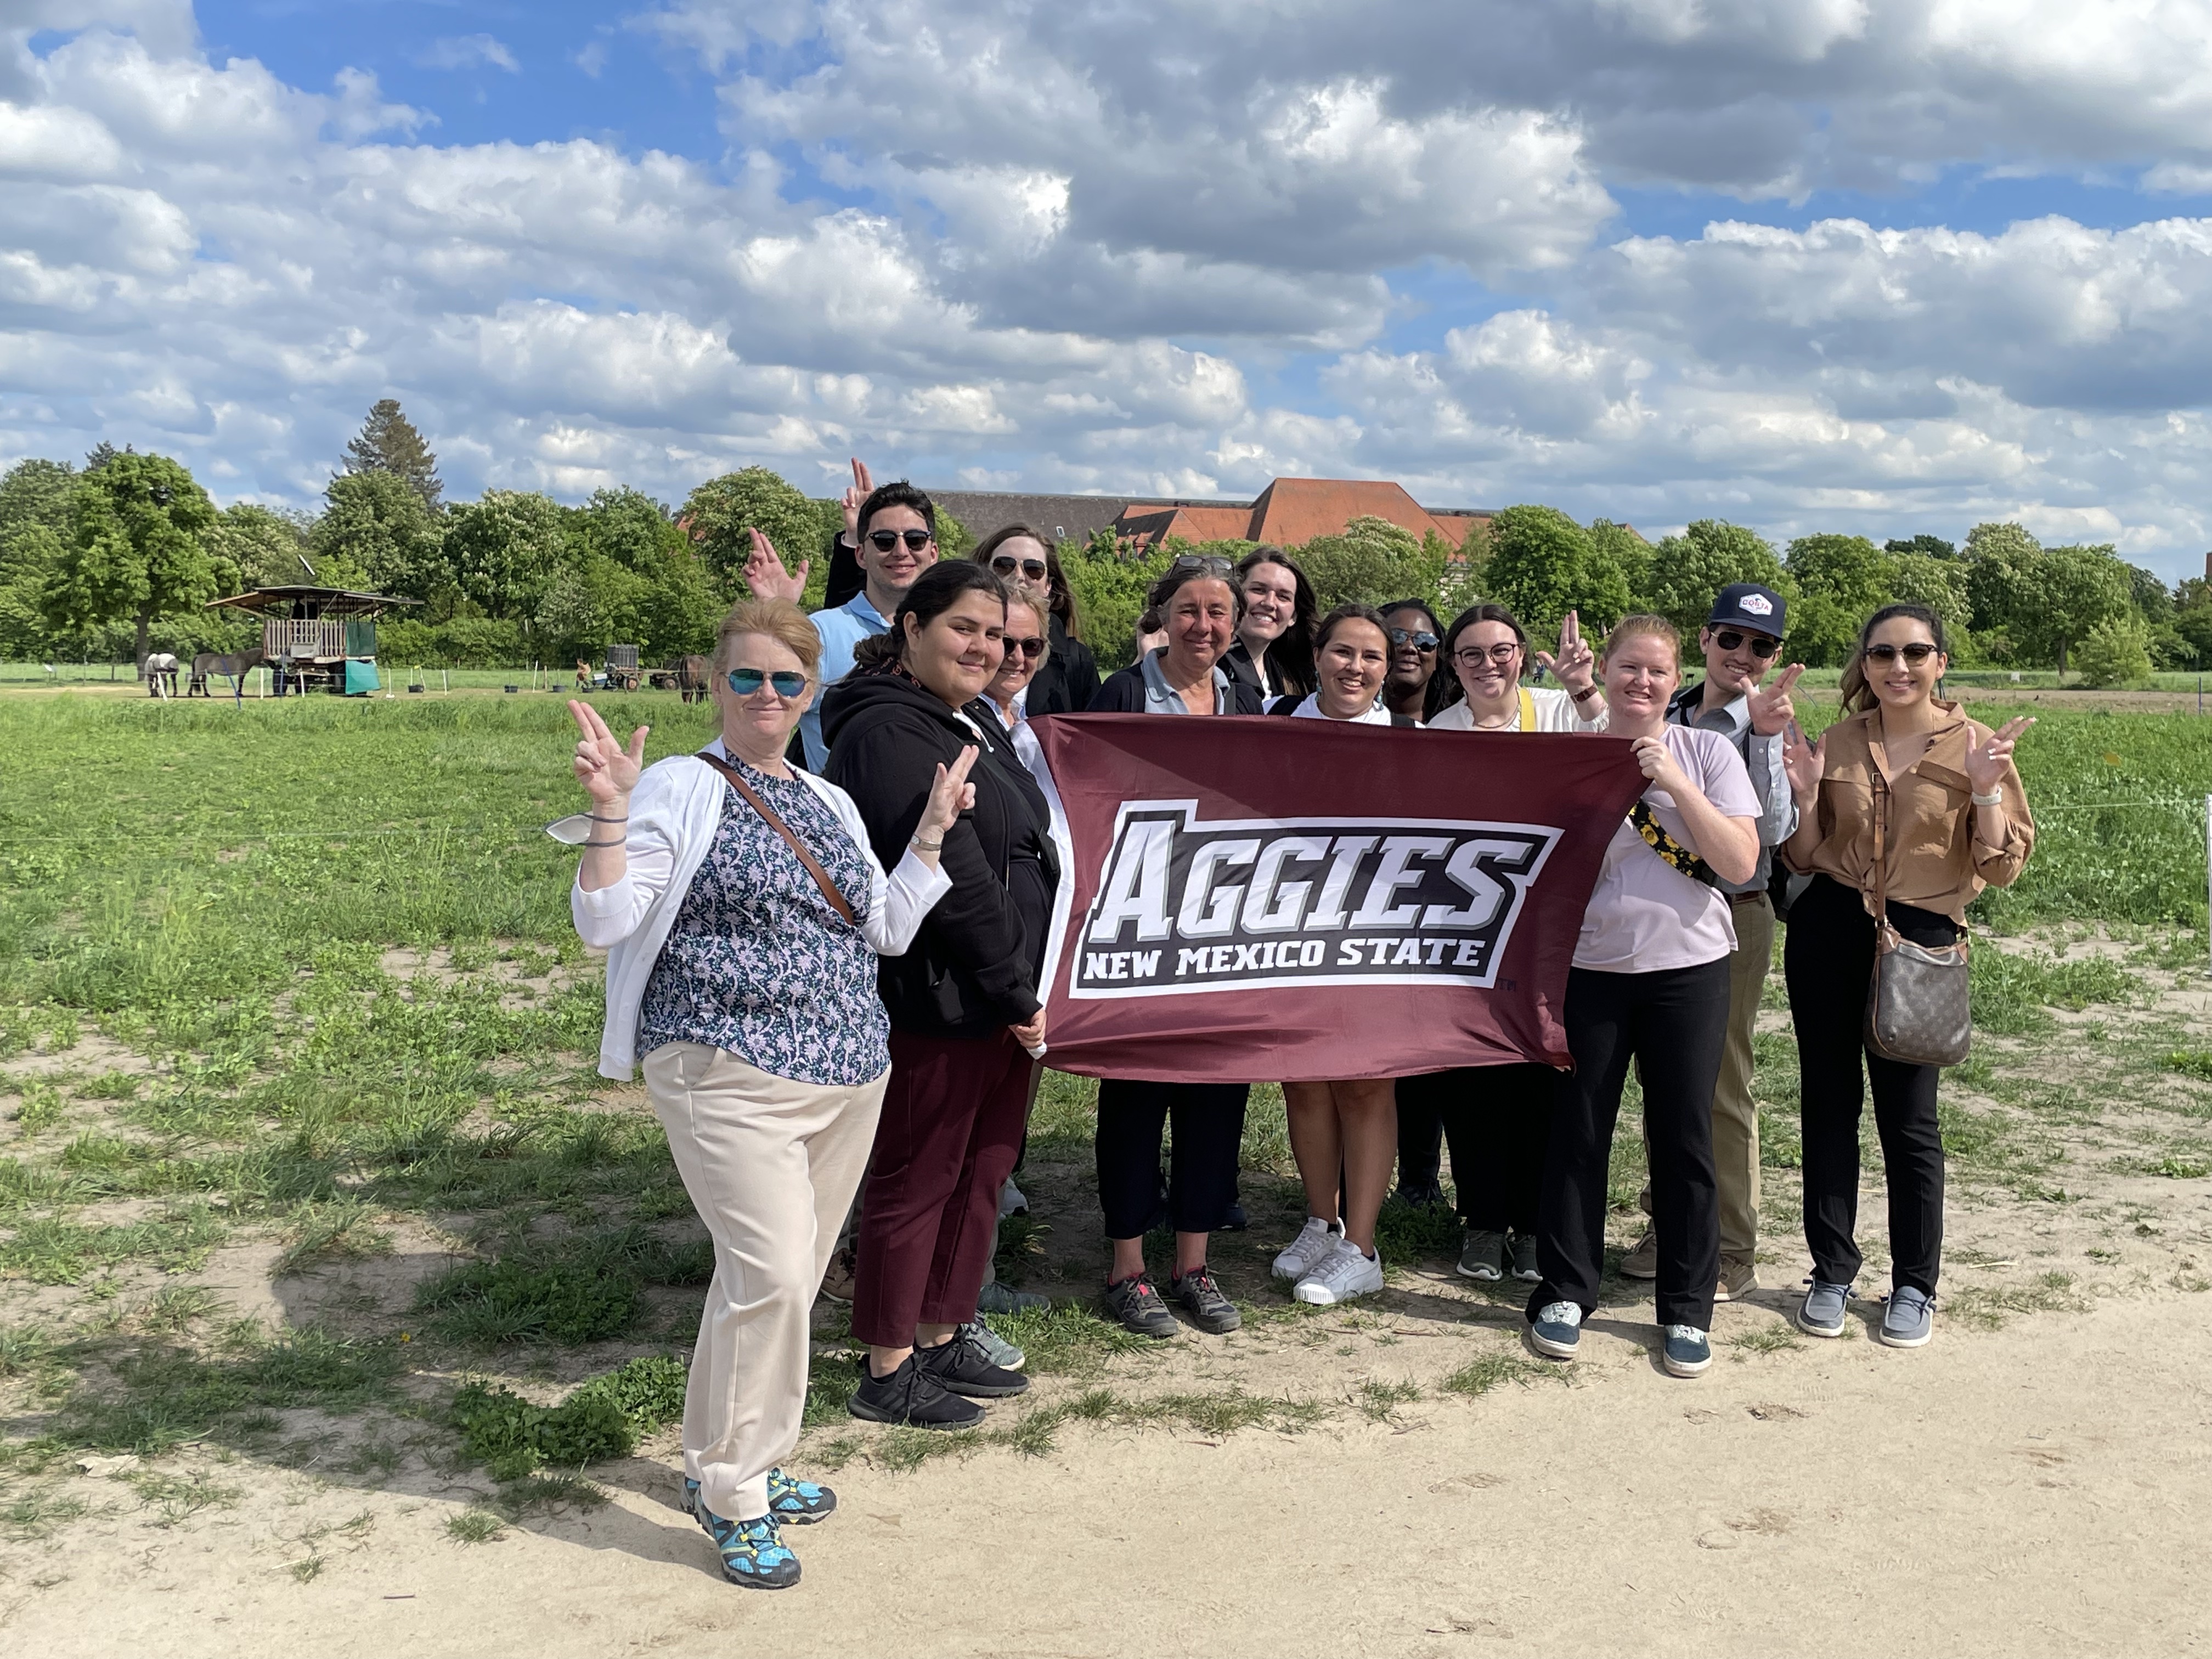 Group of students holding an Aggie banner